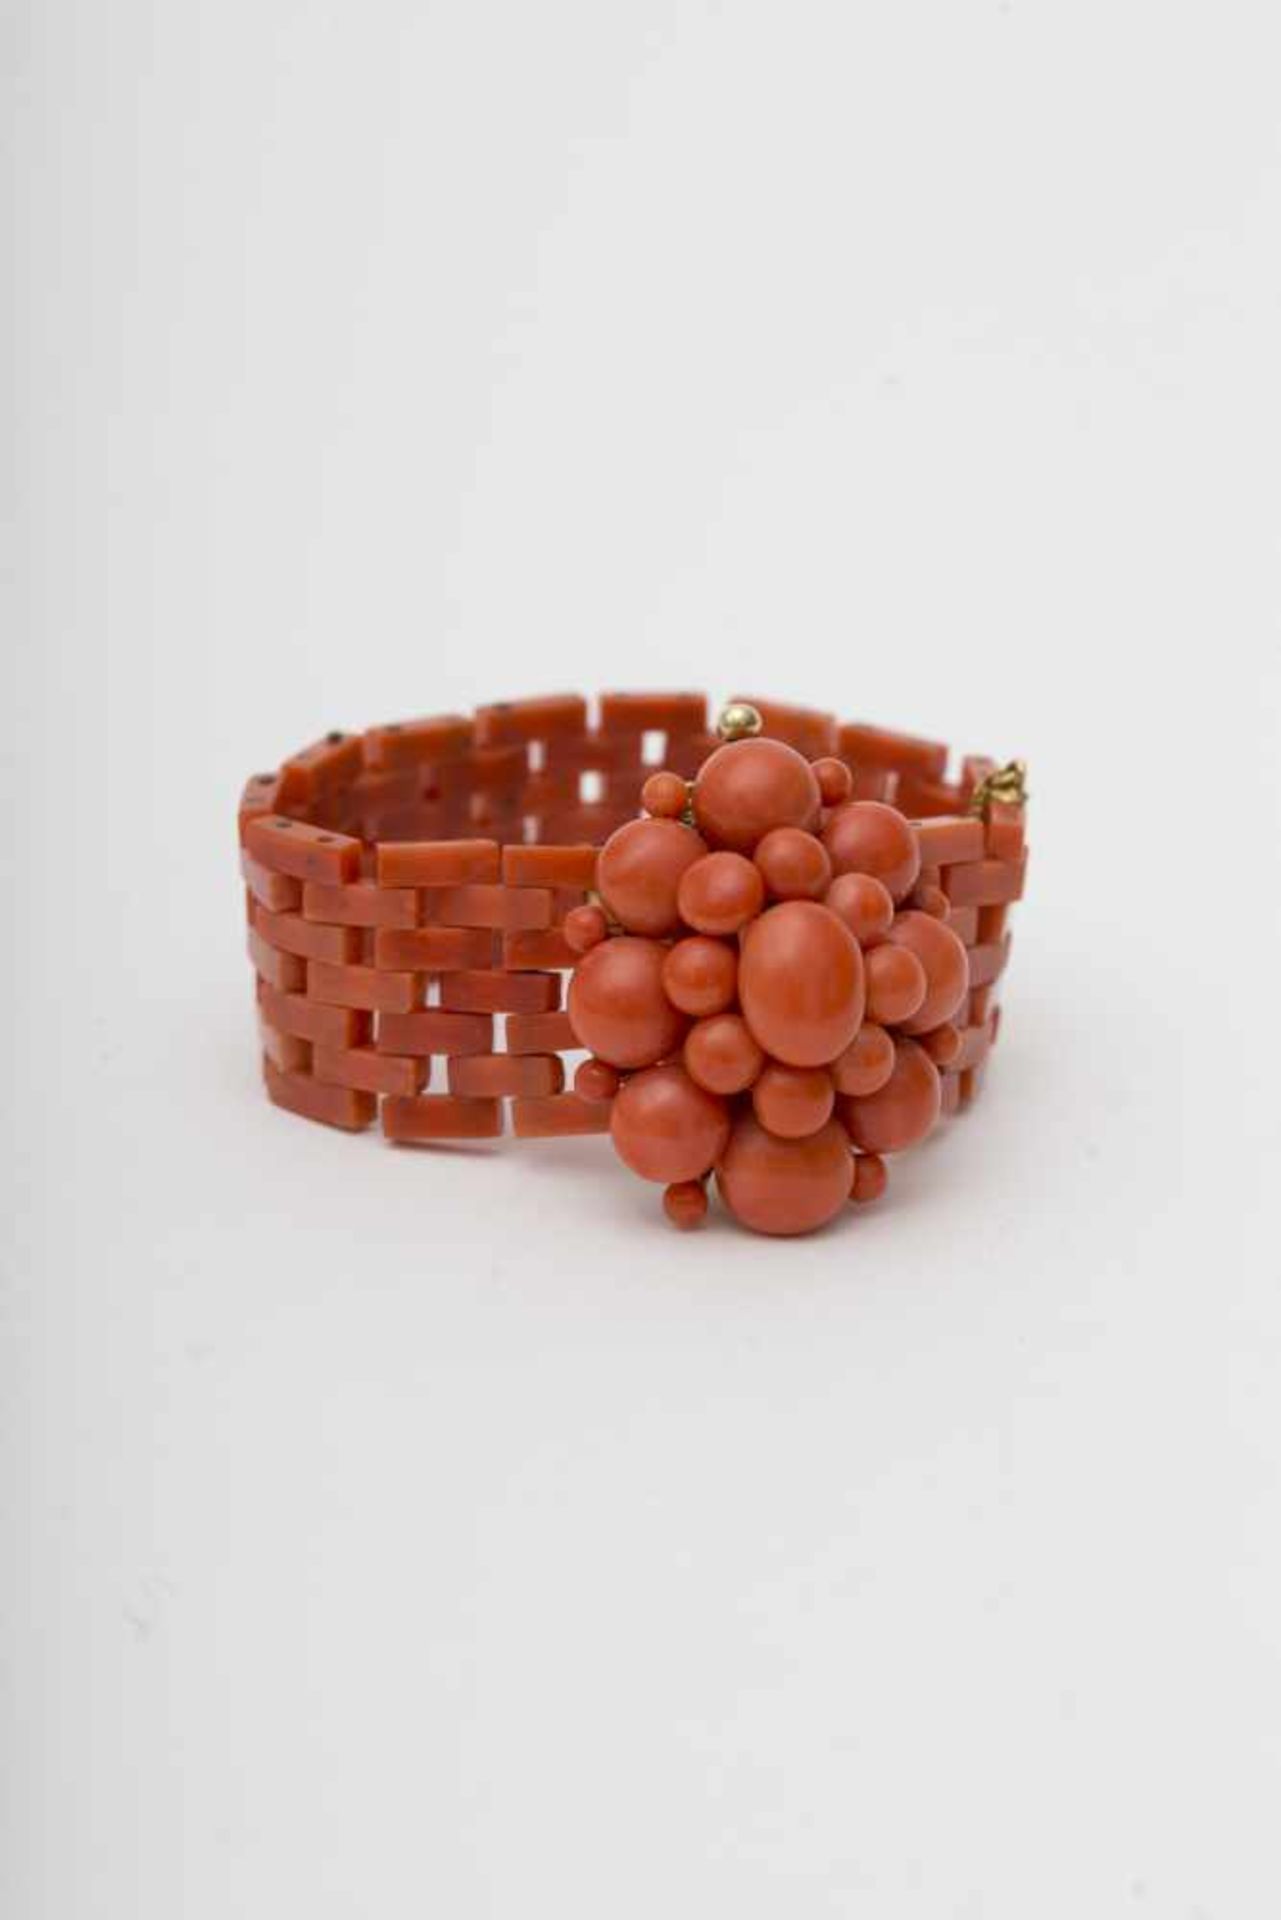 Napoleon III bracelet Coral, adorned with an oval central design composed of flat coral balls of